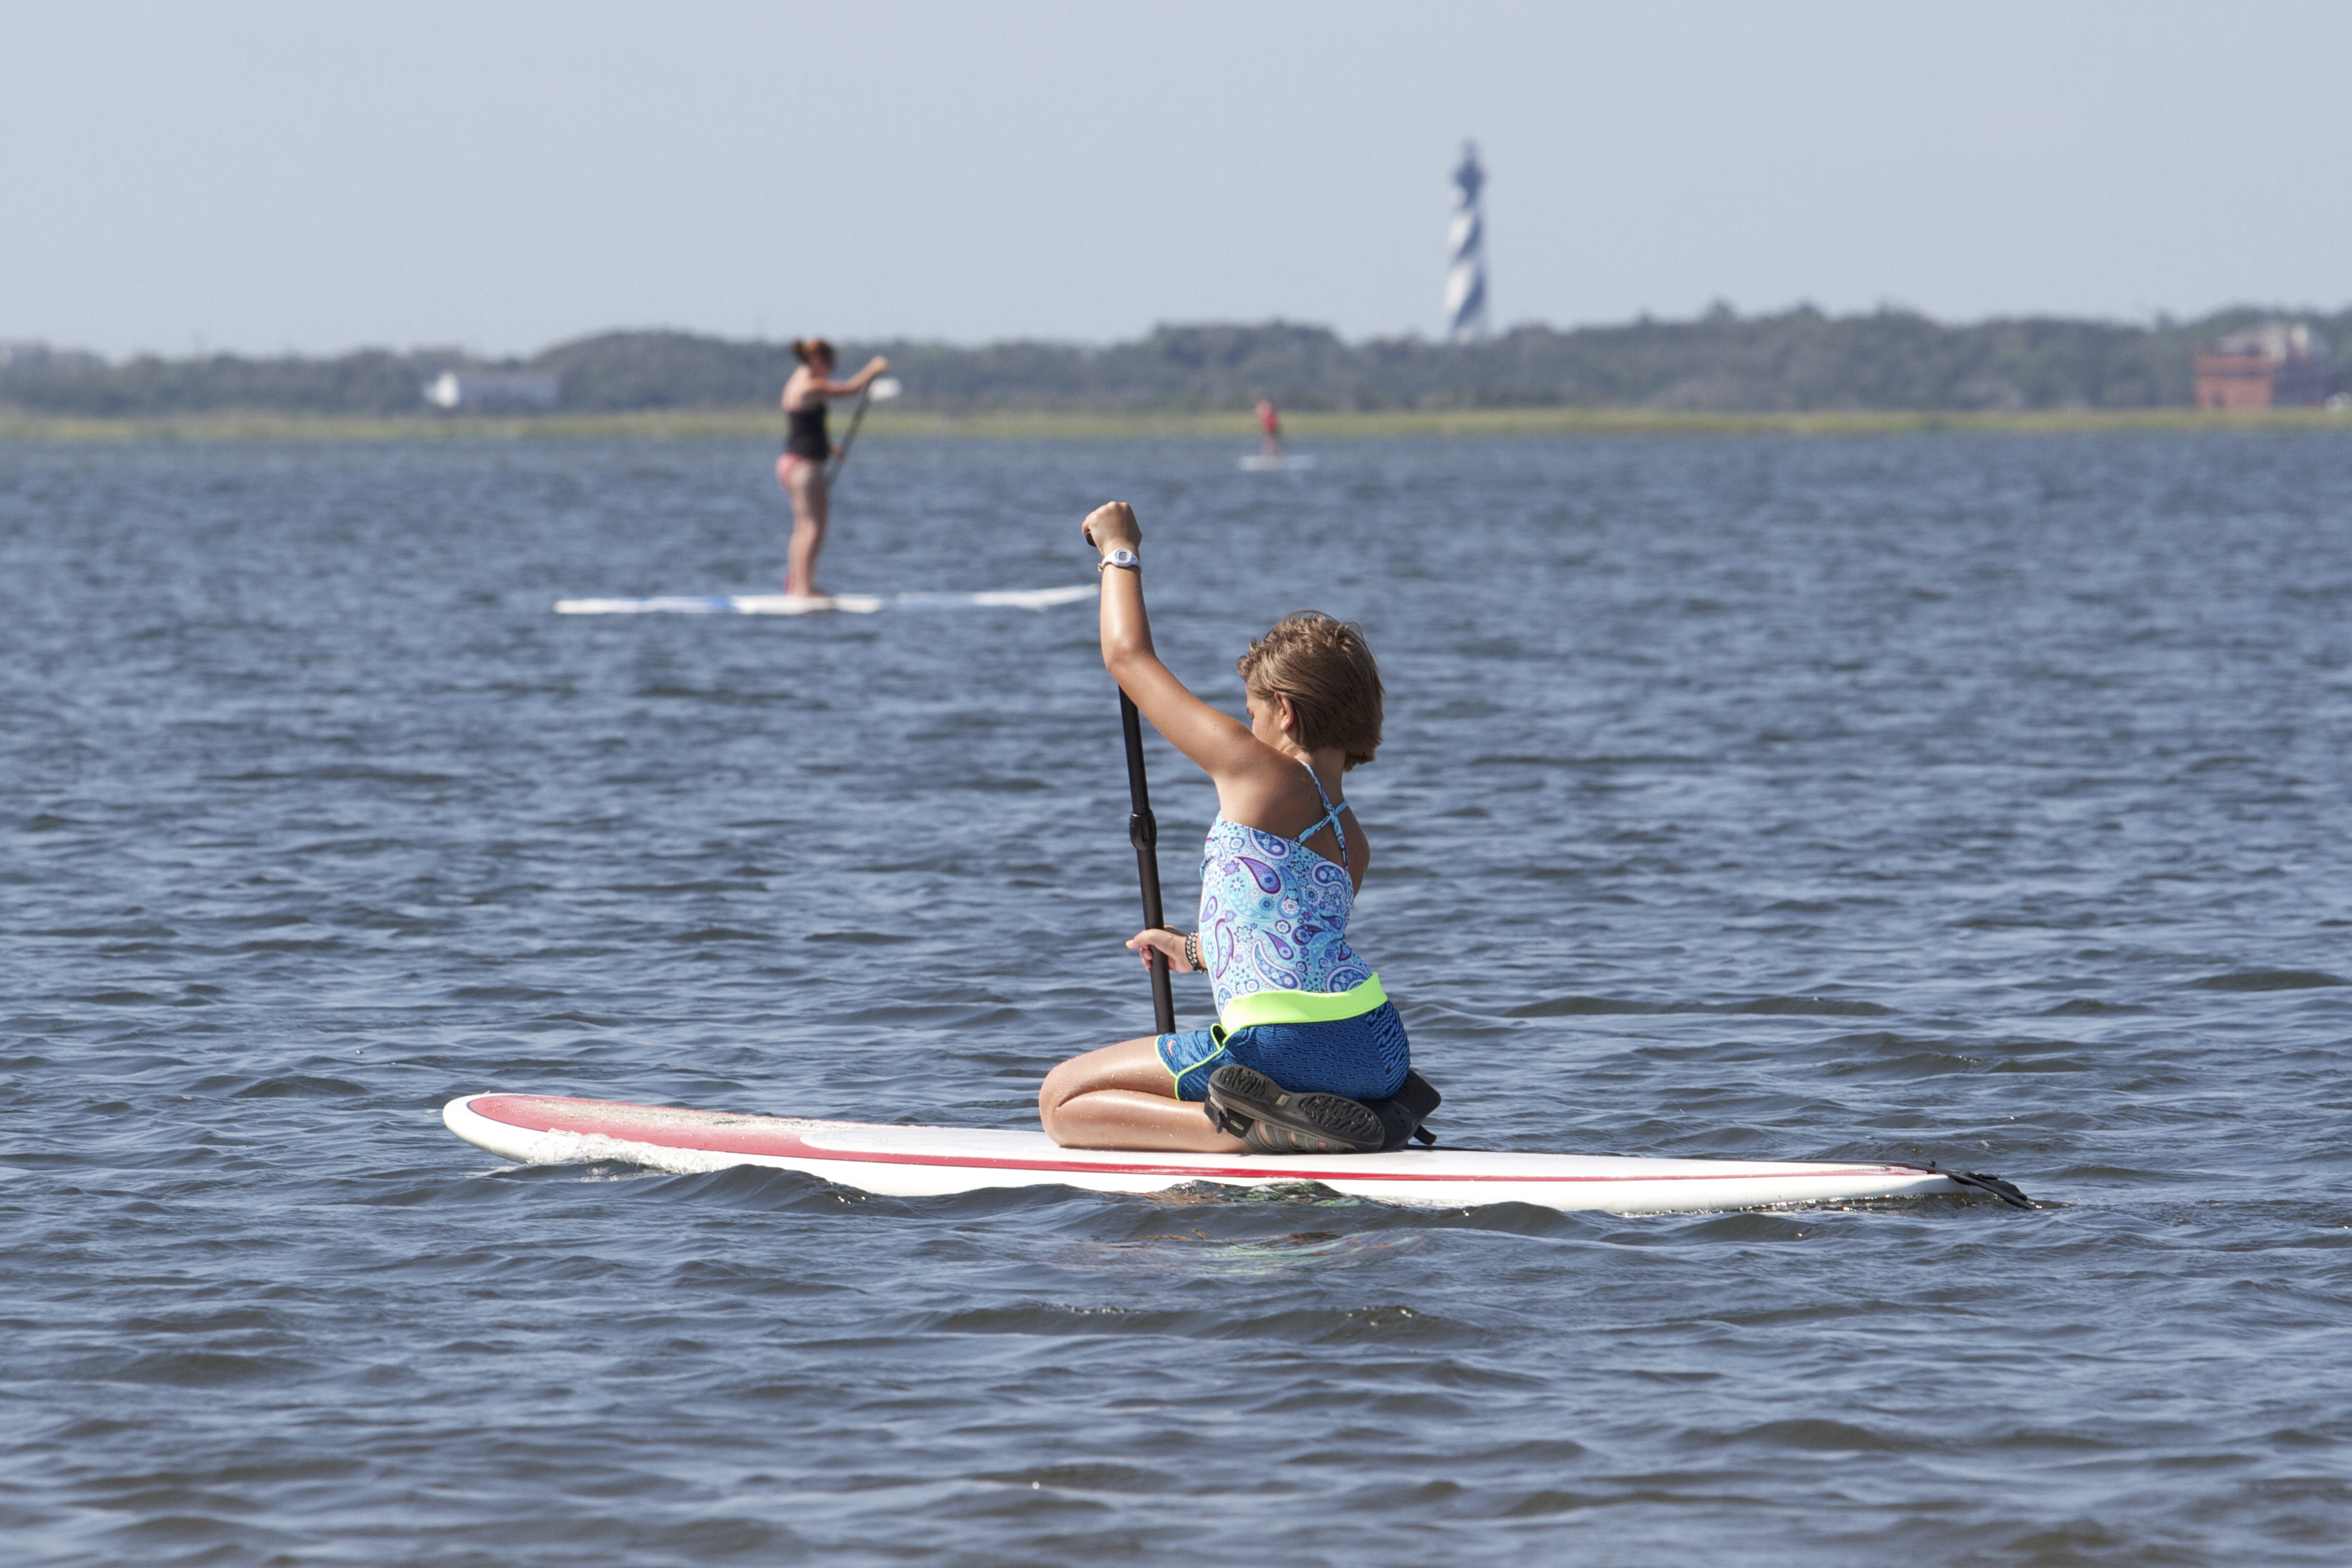 A young girl paddles across the water with the Cape Hatteras Lighthouse visible in the distance.